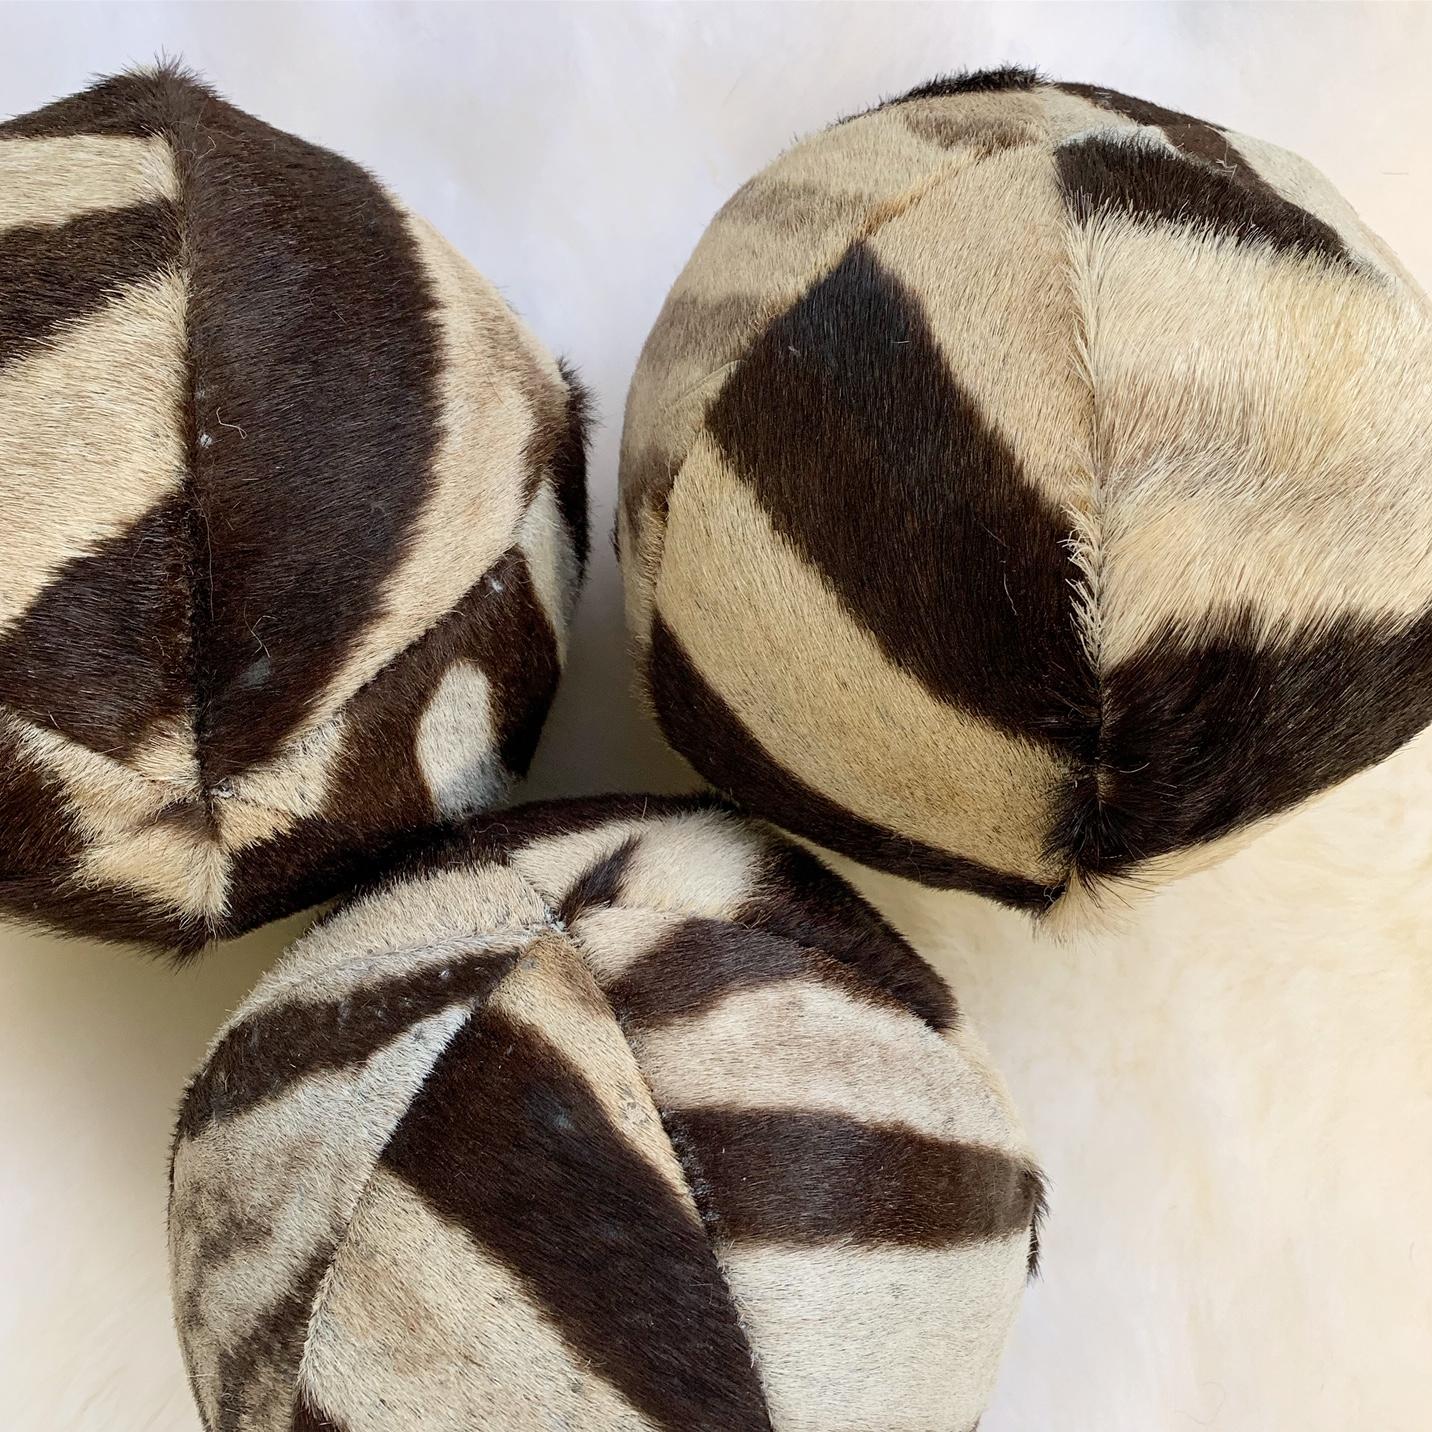 Our zebra balls are handcrafted from our beautiful Forsyth zebra hides. The most beautiful zebra hides are selected, handcut, handstitched, and hand stuffed with the finest insert. Each step is meticulously curated by Saint Louis based Forsyth